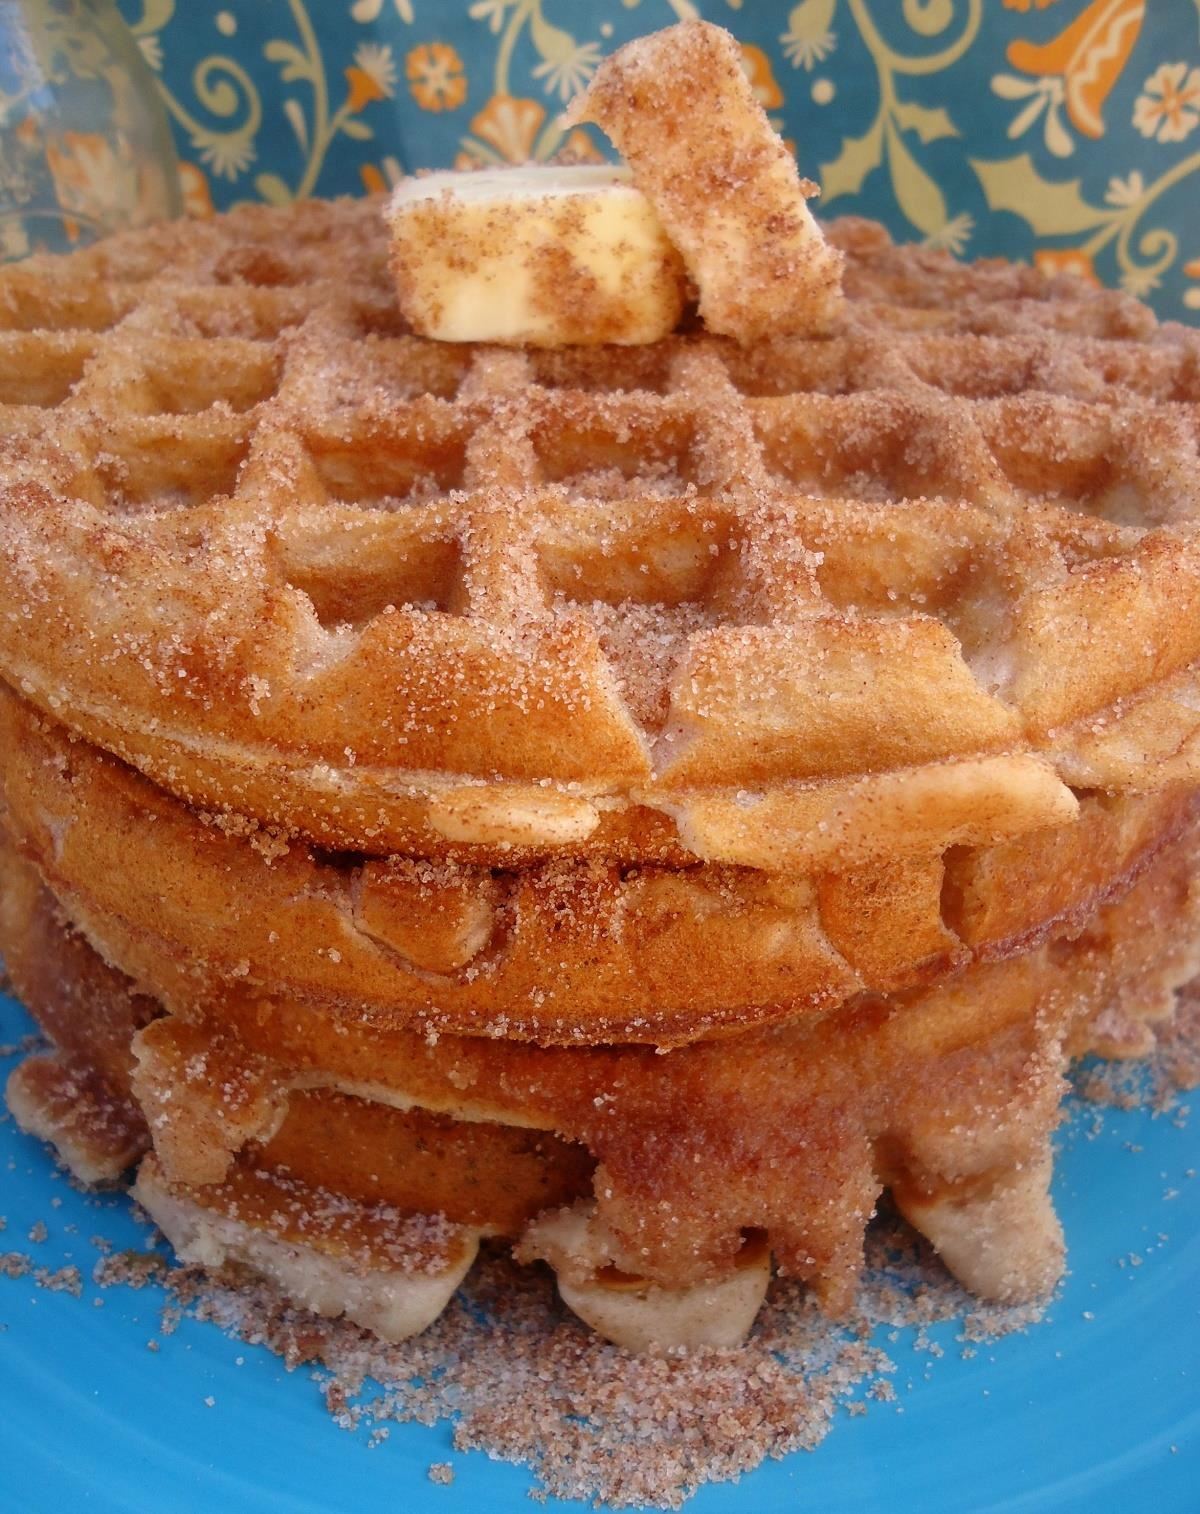 12 More Delicious Reasons to Dust Off Your Waffle Maker